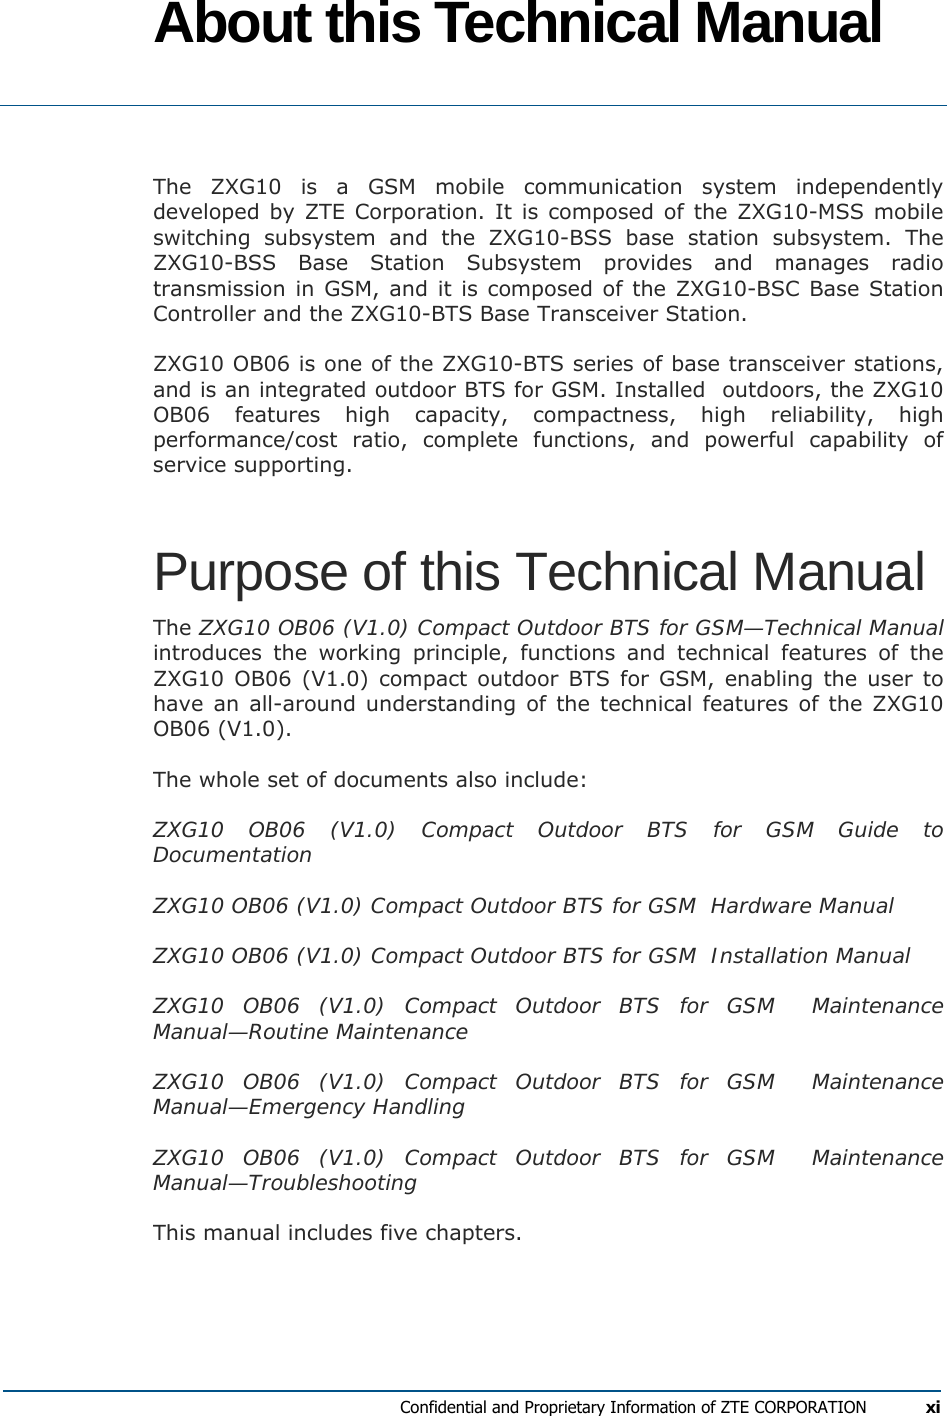  Confidential and Proprietary Information of ZTE CORPORATION xi About this Technical Manual  The ZXG10 is a GSM mobile communication system independently developed by ZTE Corporation. It is composed of the ZXG10-MSS mobile switching subsystem and the ZXG10-BSS base station subsystem. The ZXG10-BSS Base Station Subsystem provides and manages radio transmission in GSM, and it is composed of the ZXG10-BSC Base Station Controller and the ZXG10-BTS Base Transceiver Station. ZXG10 OB06 is one of the ZXG10-BTS series of base transceiver stations, and is an integrated outdoor BTS for GSM. Installed  outdoors, the ZXG10 OB06 features high capacity, compactness, high reliability, high performance/cost ratio, complete functions, and powerful capability of service supporting. Purpose of this Technical Manual The ZXG10 OB06 (V1.0) Compact Outdoor BTS for GSM—Technical Manual introduces the working principle, functions and technical features of the ZXG10 OB06 (V1.0) compact outdoor BTS for GSM, enabling the user to have an all-around understanding of the technical features of the ZXG10 OB06 (V1.0). The whole set of documents also include: ZXG10 OB06 (V1.0) Compact Outdoor BTS for GSM Guide to Documentation ZXG10 OB06 (V1.0) Compact Outdoor BTS for GSM  Hardware Manual ZXG10 OB06 (V1.0) Compact Outdoor BTS for GSM  Installation Manual ZXG10 OB06 (V1.0) Compact Outdoor BTS for GSM  Maintenance Manual—Routine Maintenance ZXG10 OB06 (V1.0) Compact Outdoor BTS for GSM  Maintenance Manual—Emergency Handling ZXG10 OB06 (V1.0) Compact Outdoor BTS for GSM  Maintenance Manual—Troubleshooting This manual includes five chapters. 